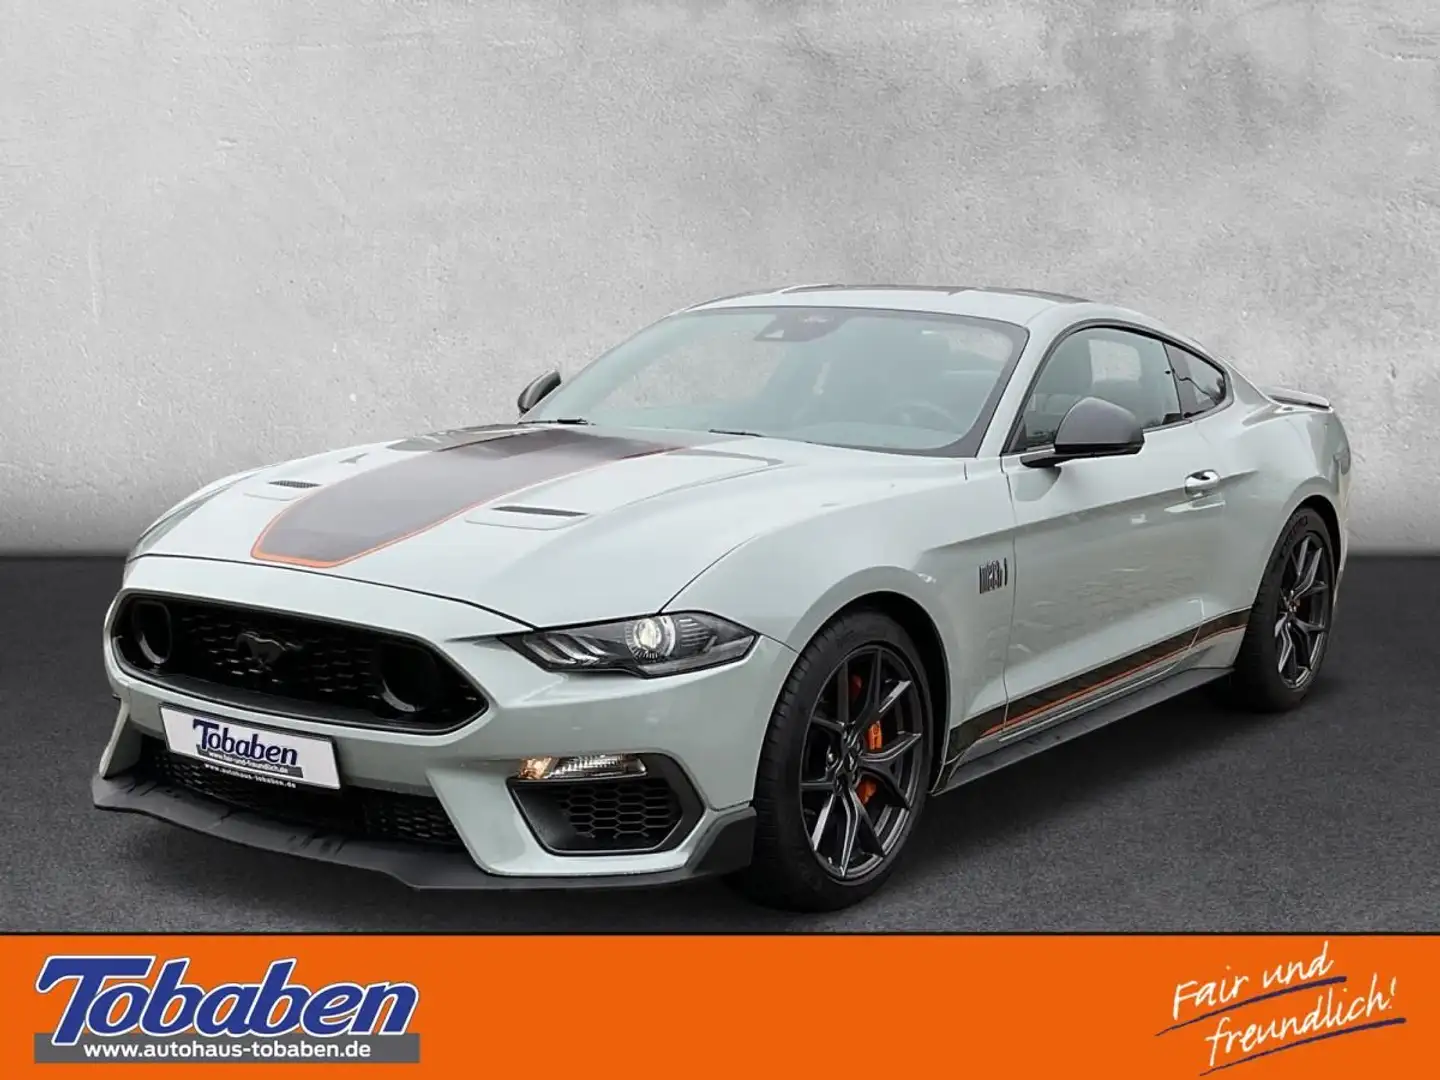 Ford Mustang MACH 1 5.0 Ti-VCT V8 338kW Auto Coupe, Gris - 1